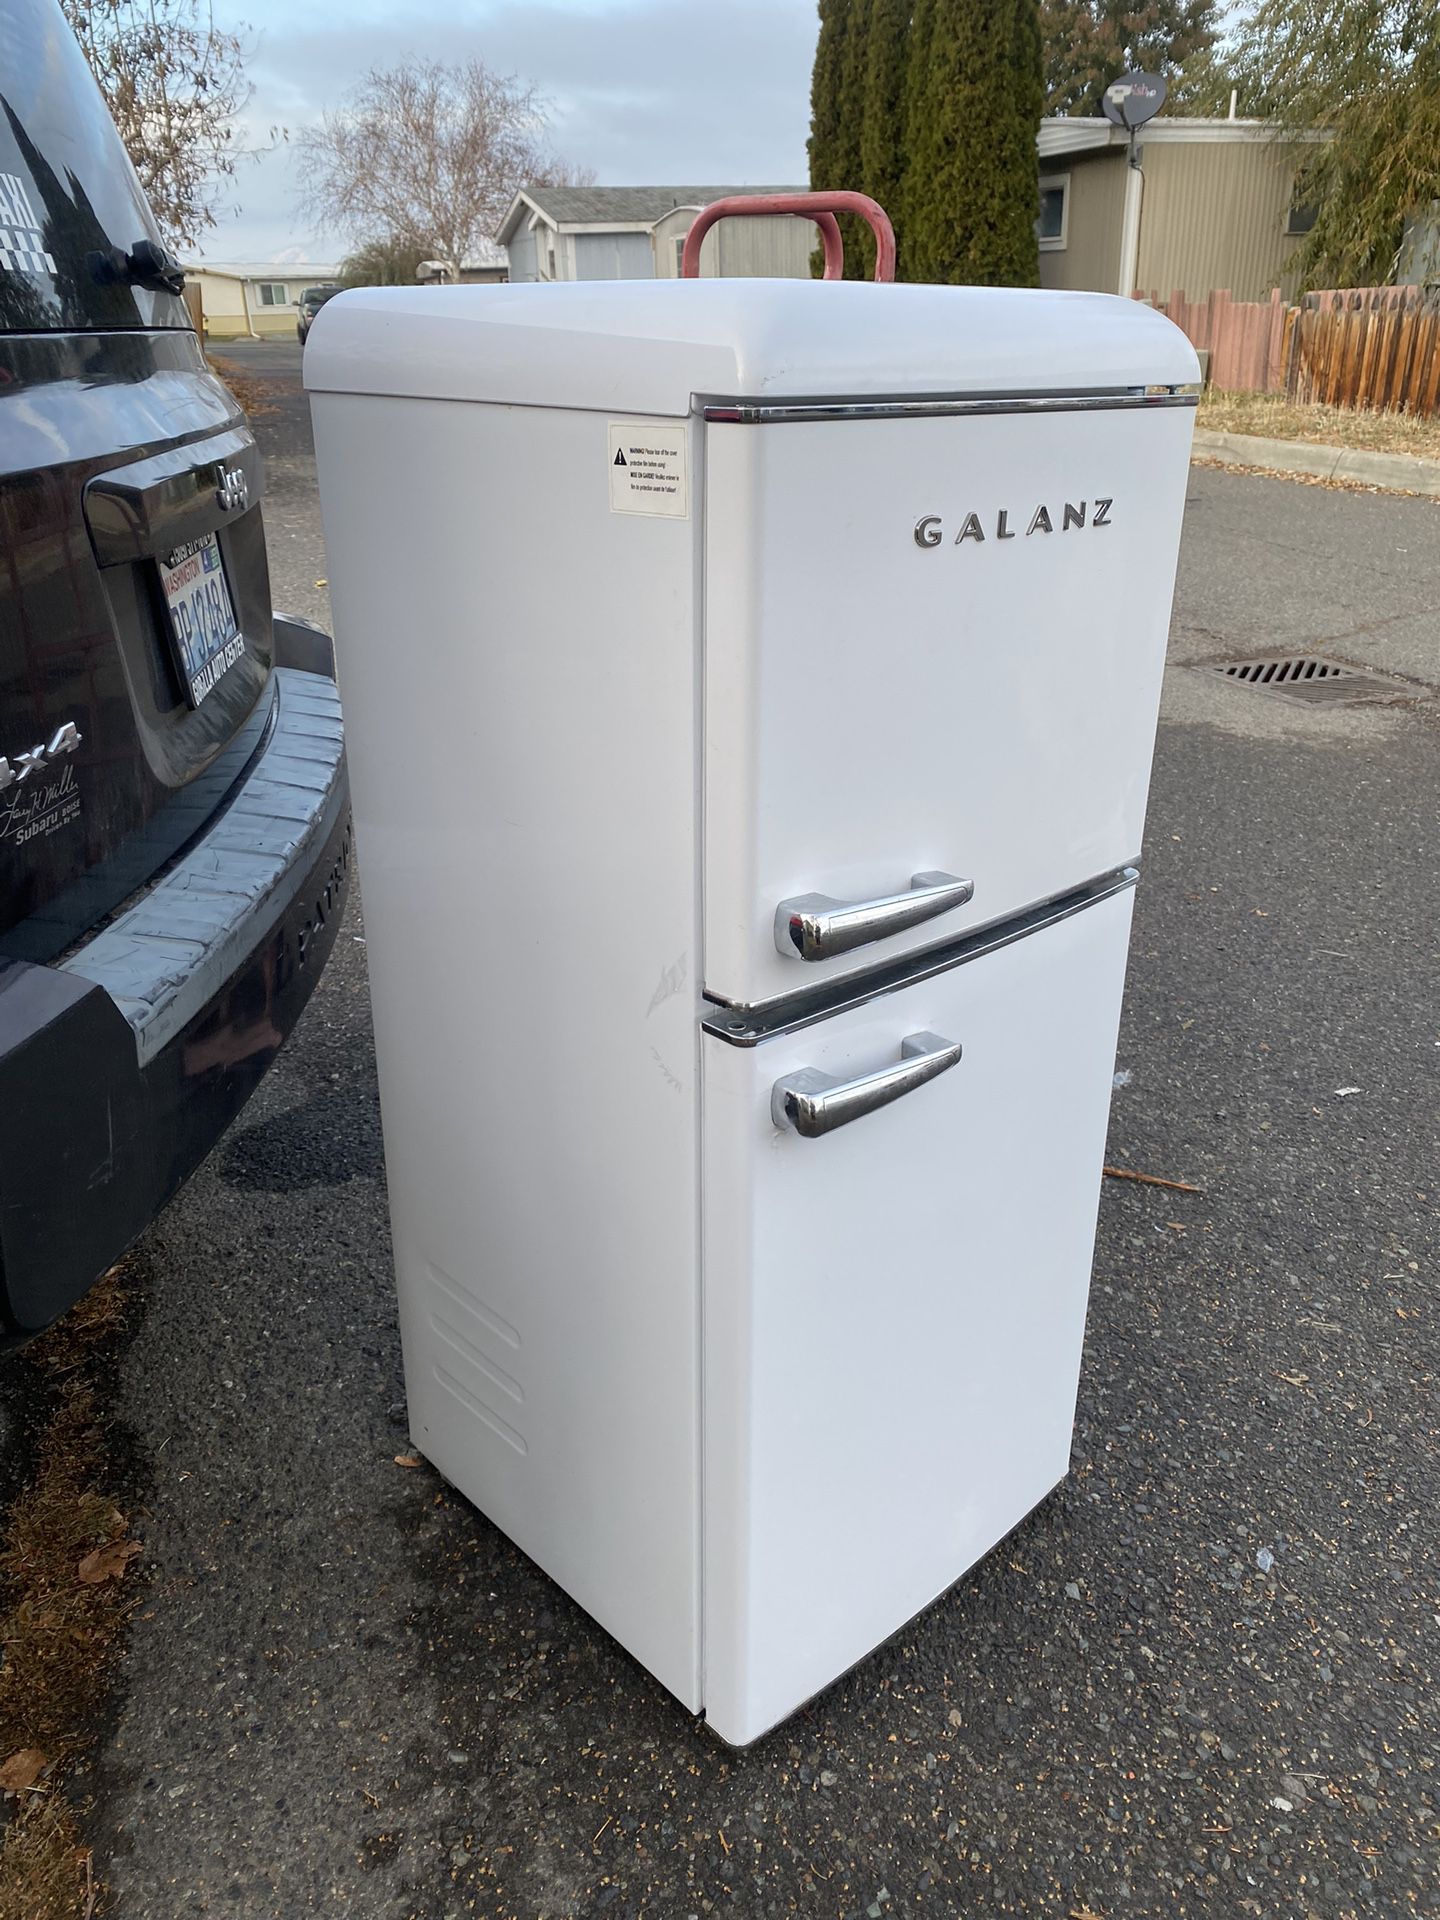 $220-Galanz medium to larger size Retro Mini Fridge 4.0 cu ft capacity with Dual Door True Freezer in white Purchased about a year ago to use while sh